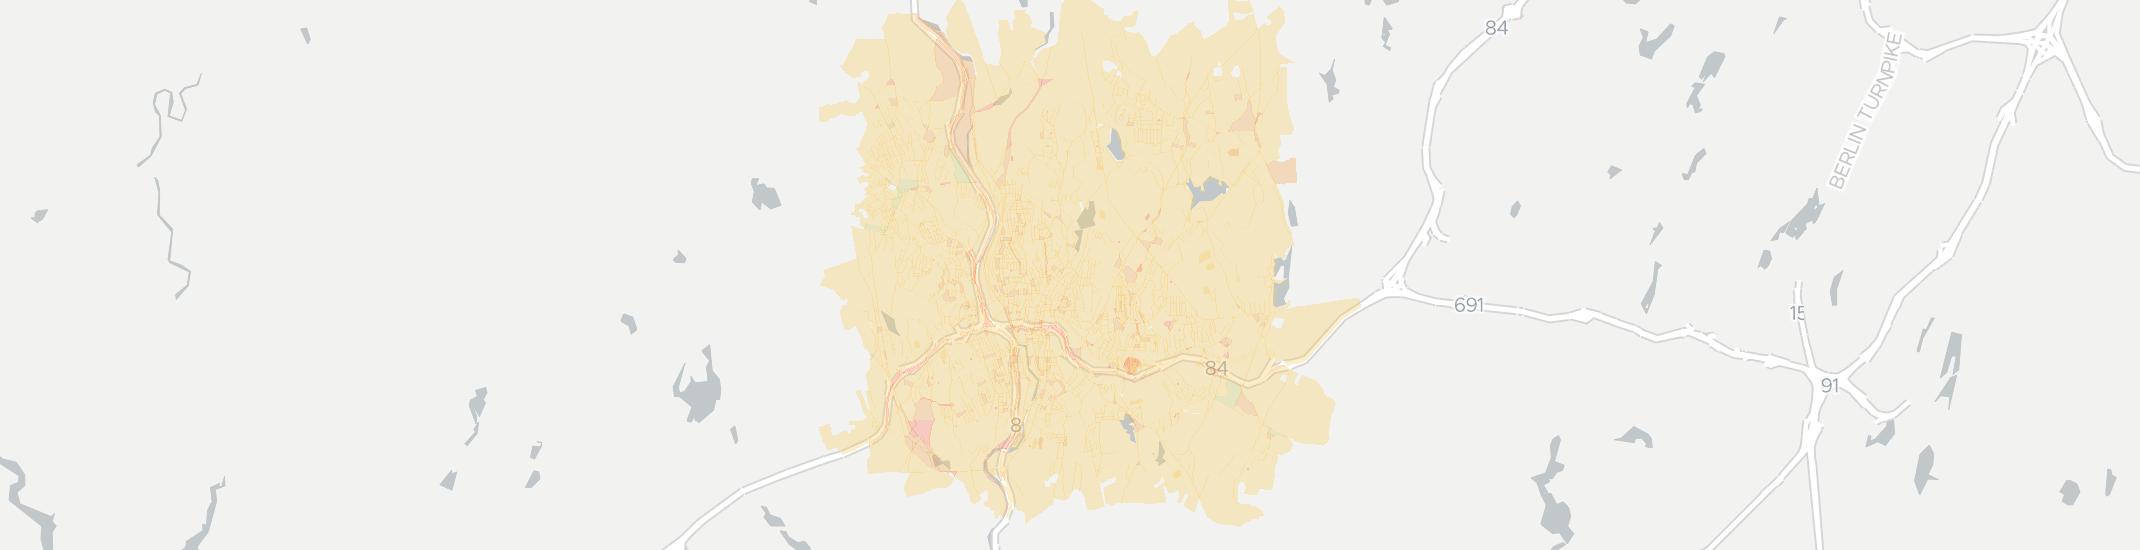 Waterbury Internet Competition Map. Click for interactive map.